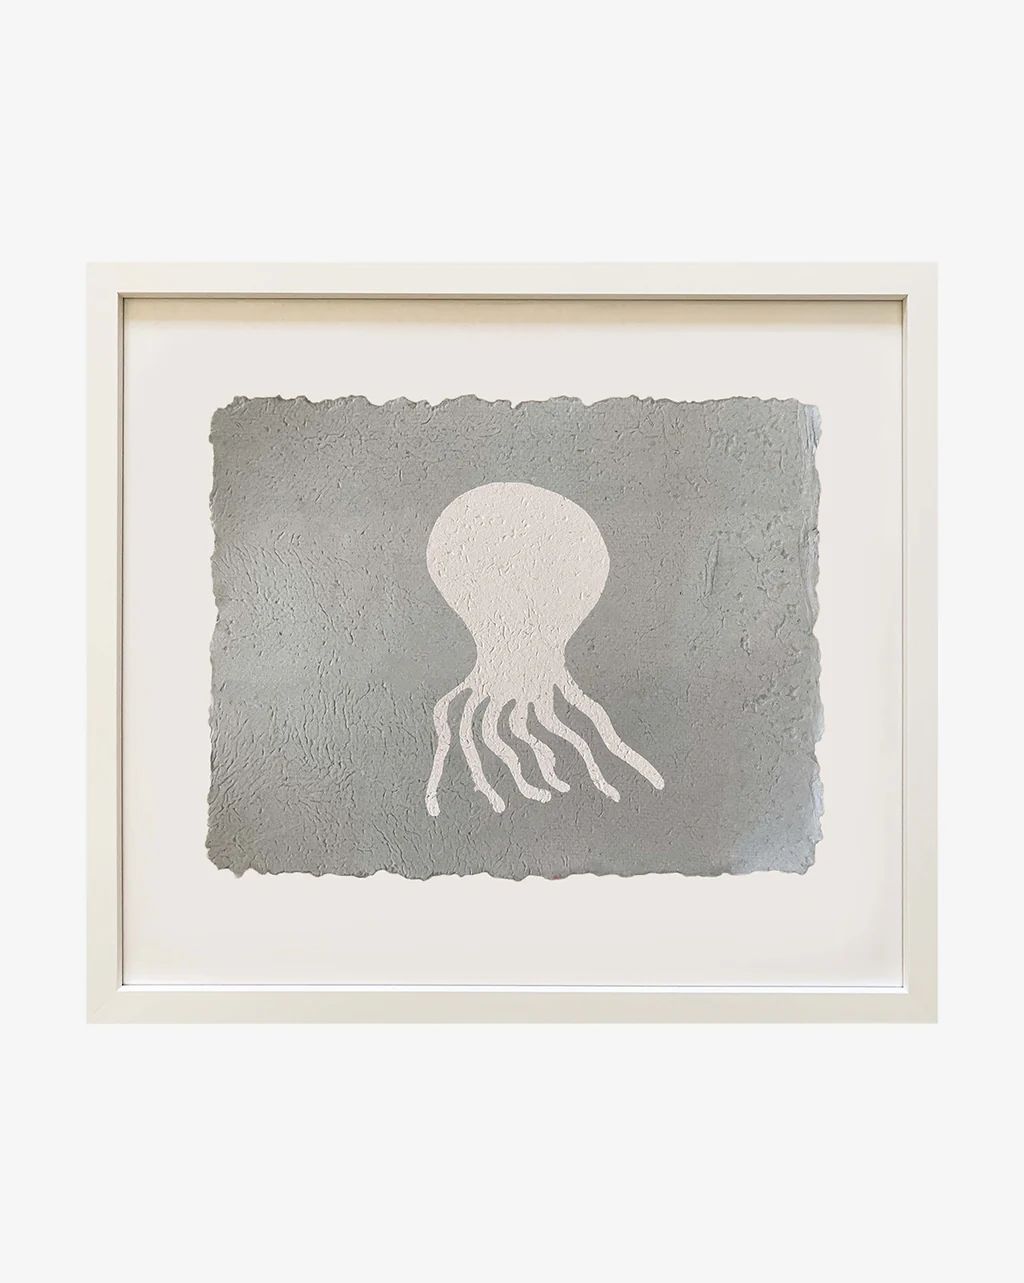 Octopus Silhouette | McGee & Co.